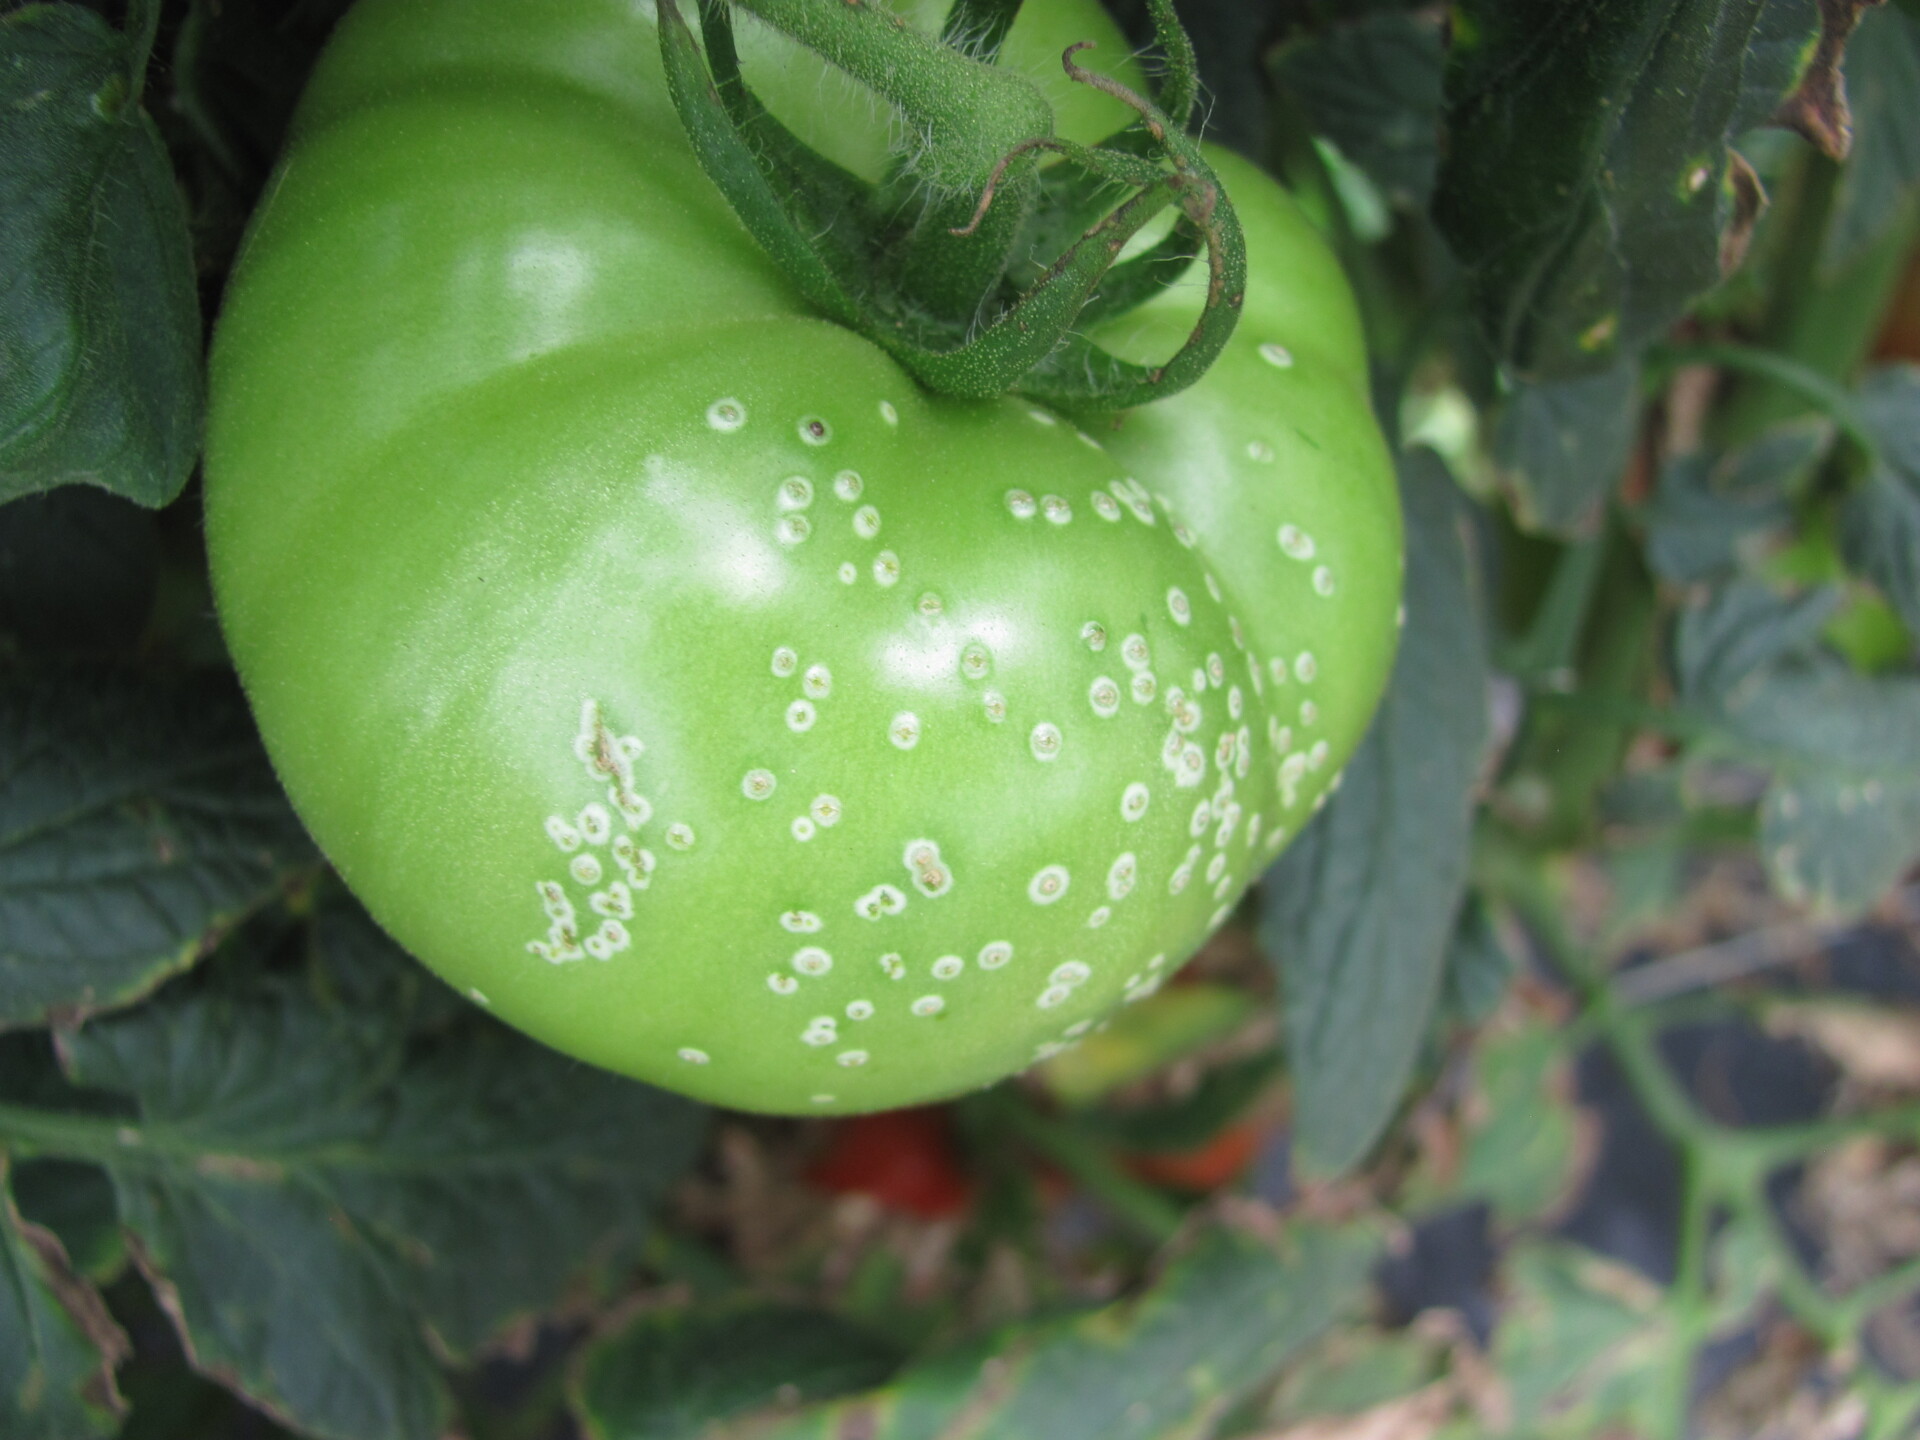 Figure 3. Bird’s eye spot infection on tomato fruit as a result of infection with bacterial canker.